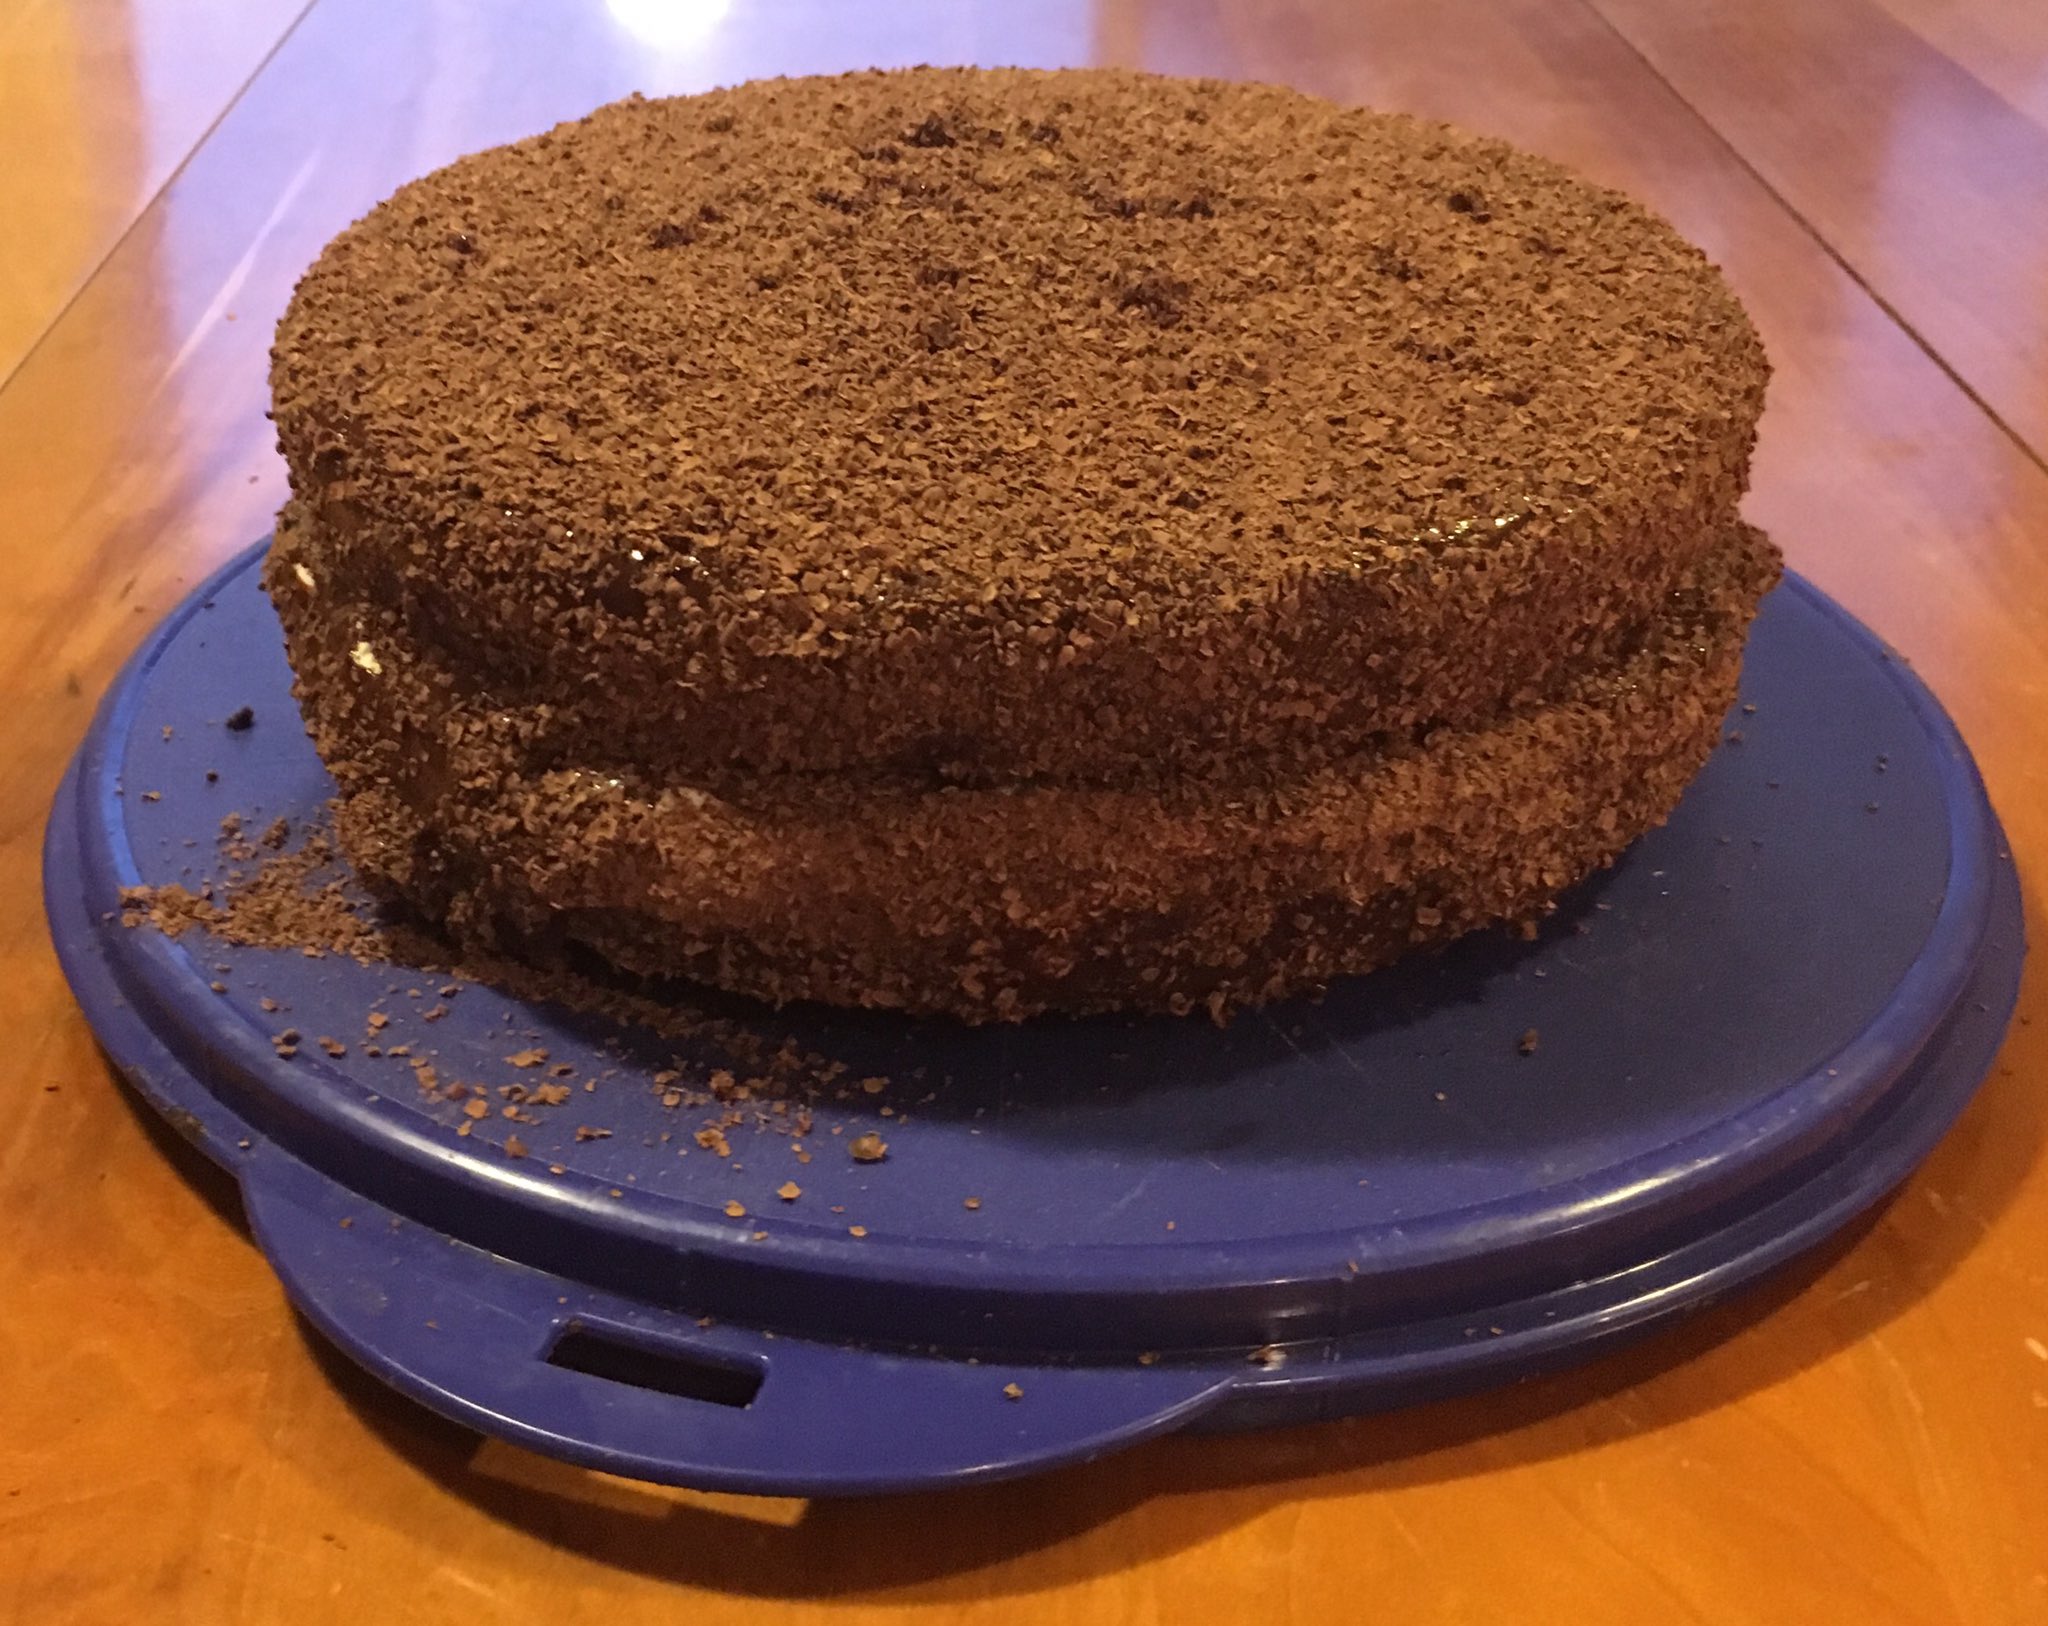 Two layer chocolate cake covered in grated chocolate sitting on a plastic blue cake platter.